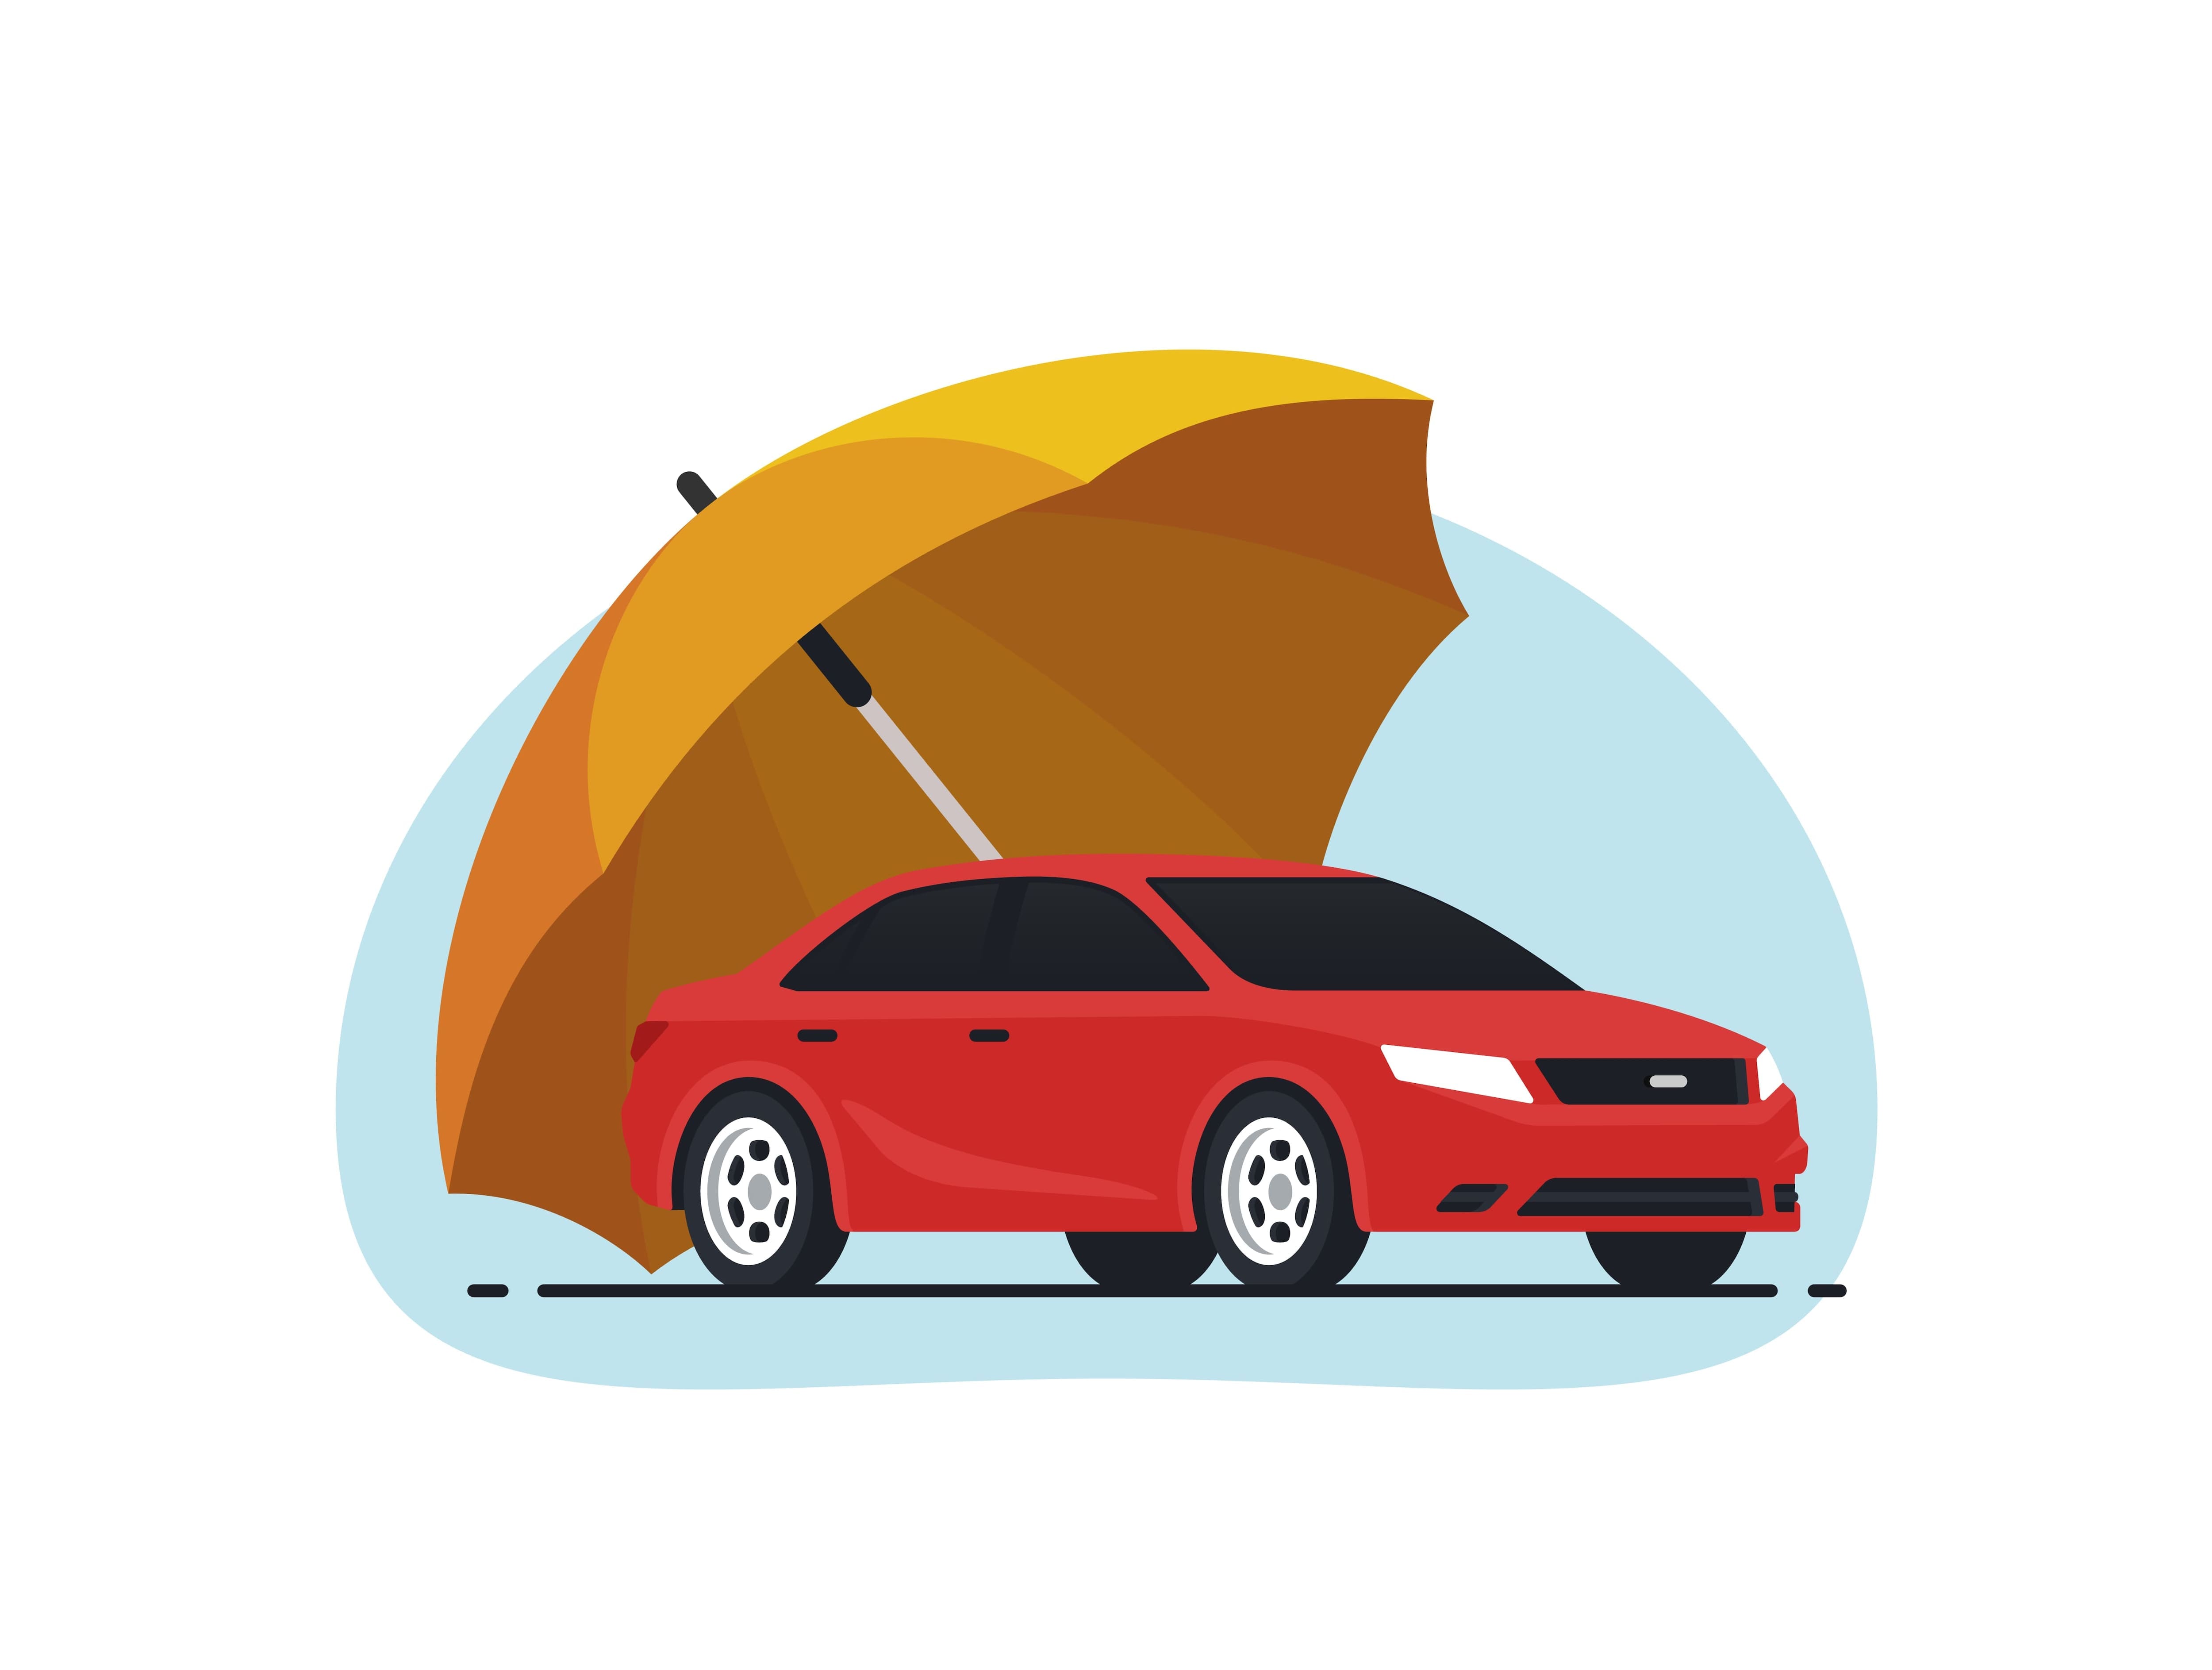 How much insurance does a leased car need?